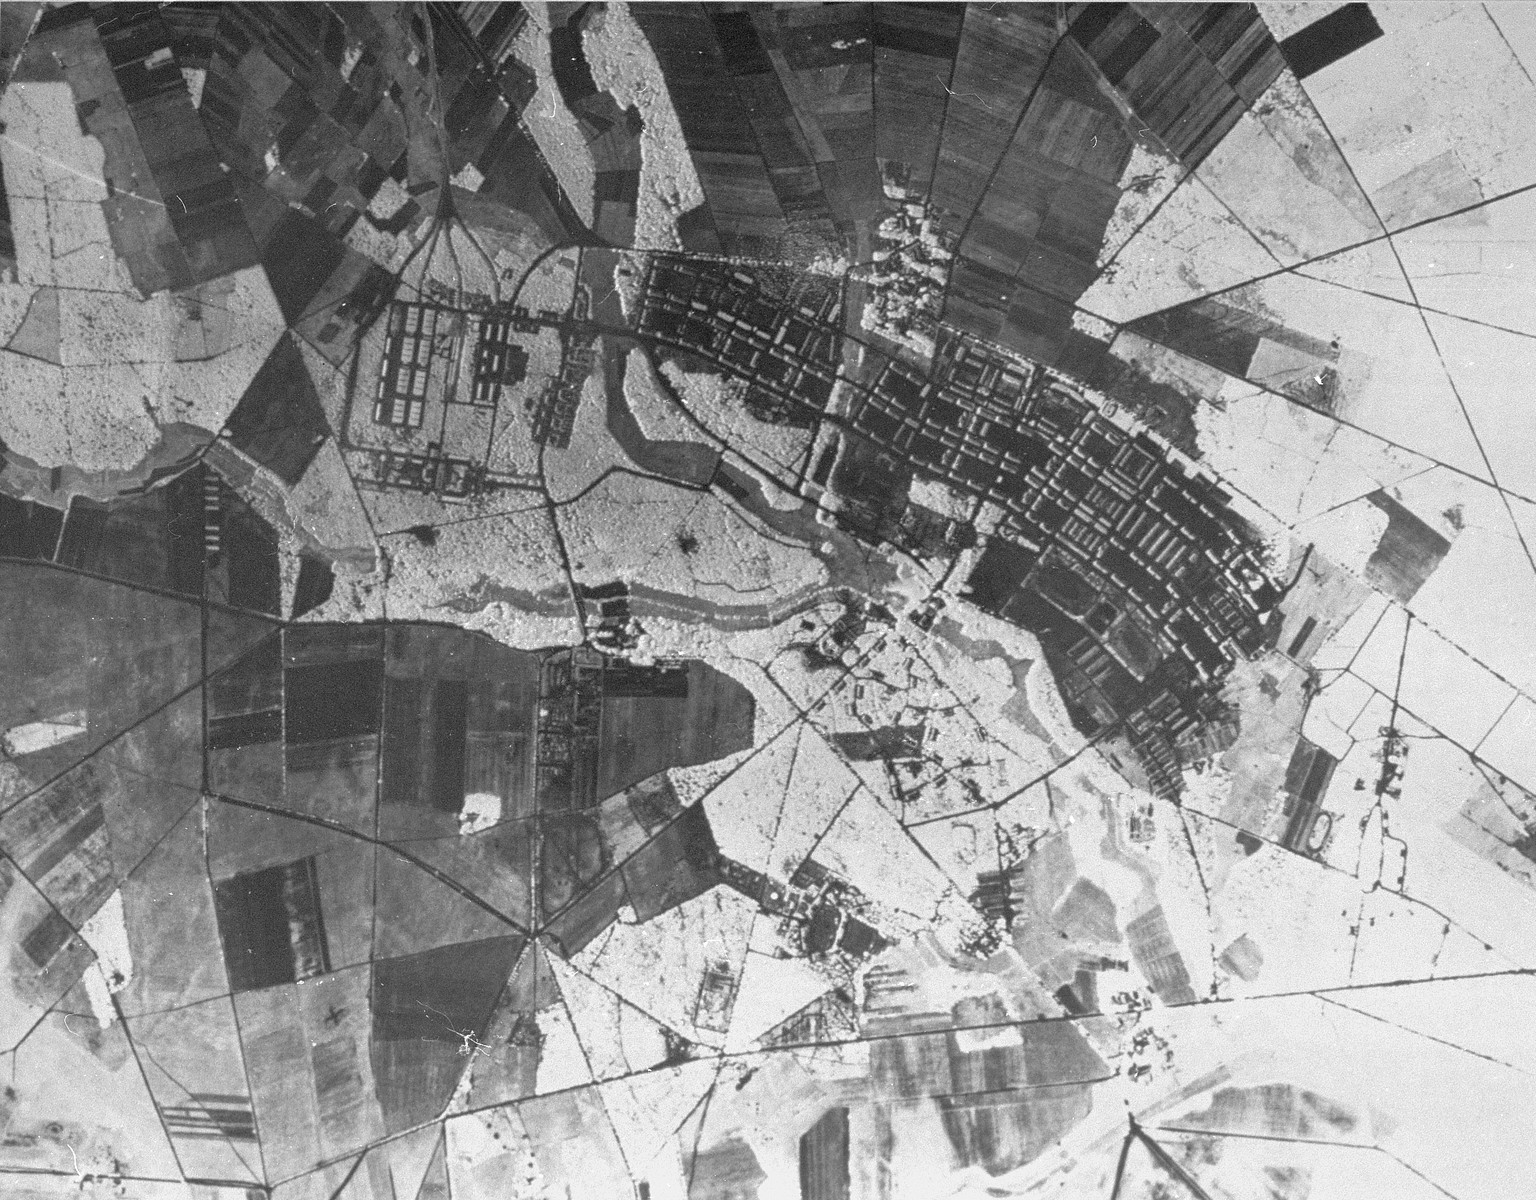 Aerial reconnaissance photograph of the Bergen-Belsen concentration camp area showing the military training base, about two kilometers northeast of the camp.